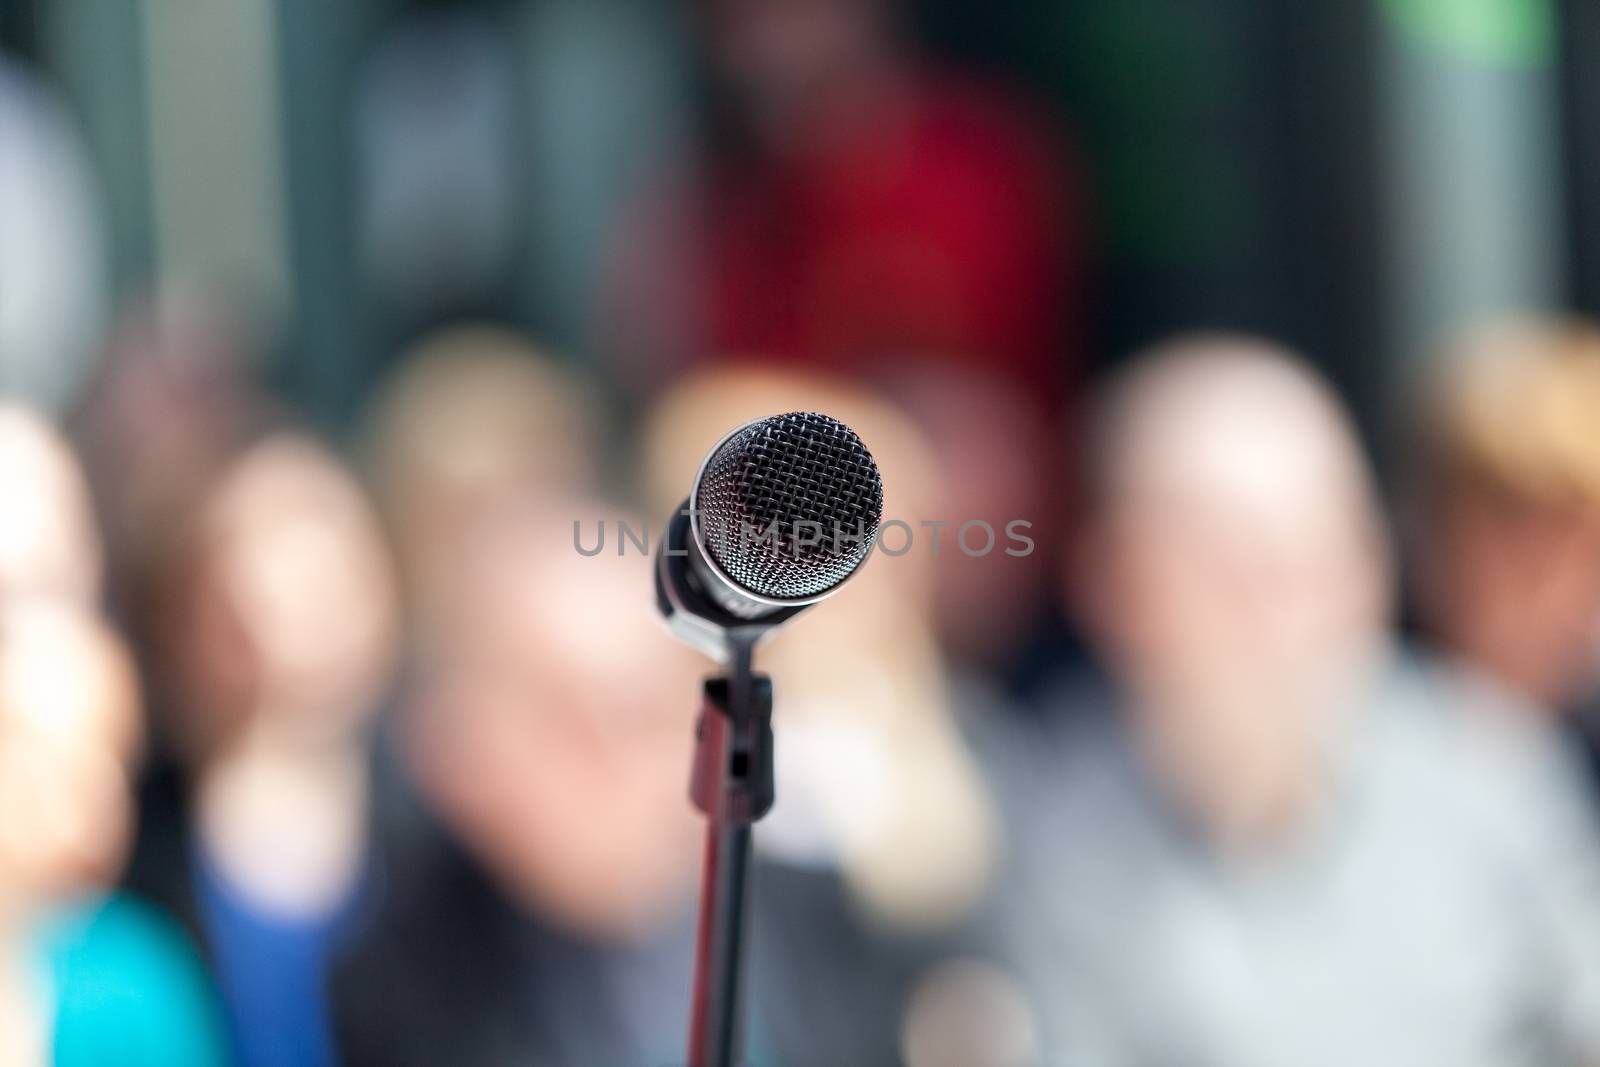 Microphone in focus against blurred group of people